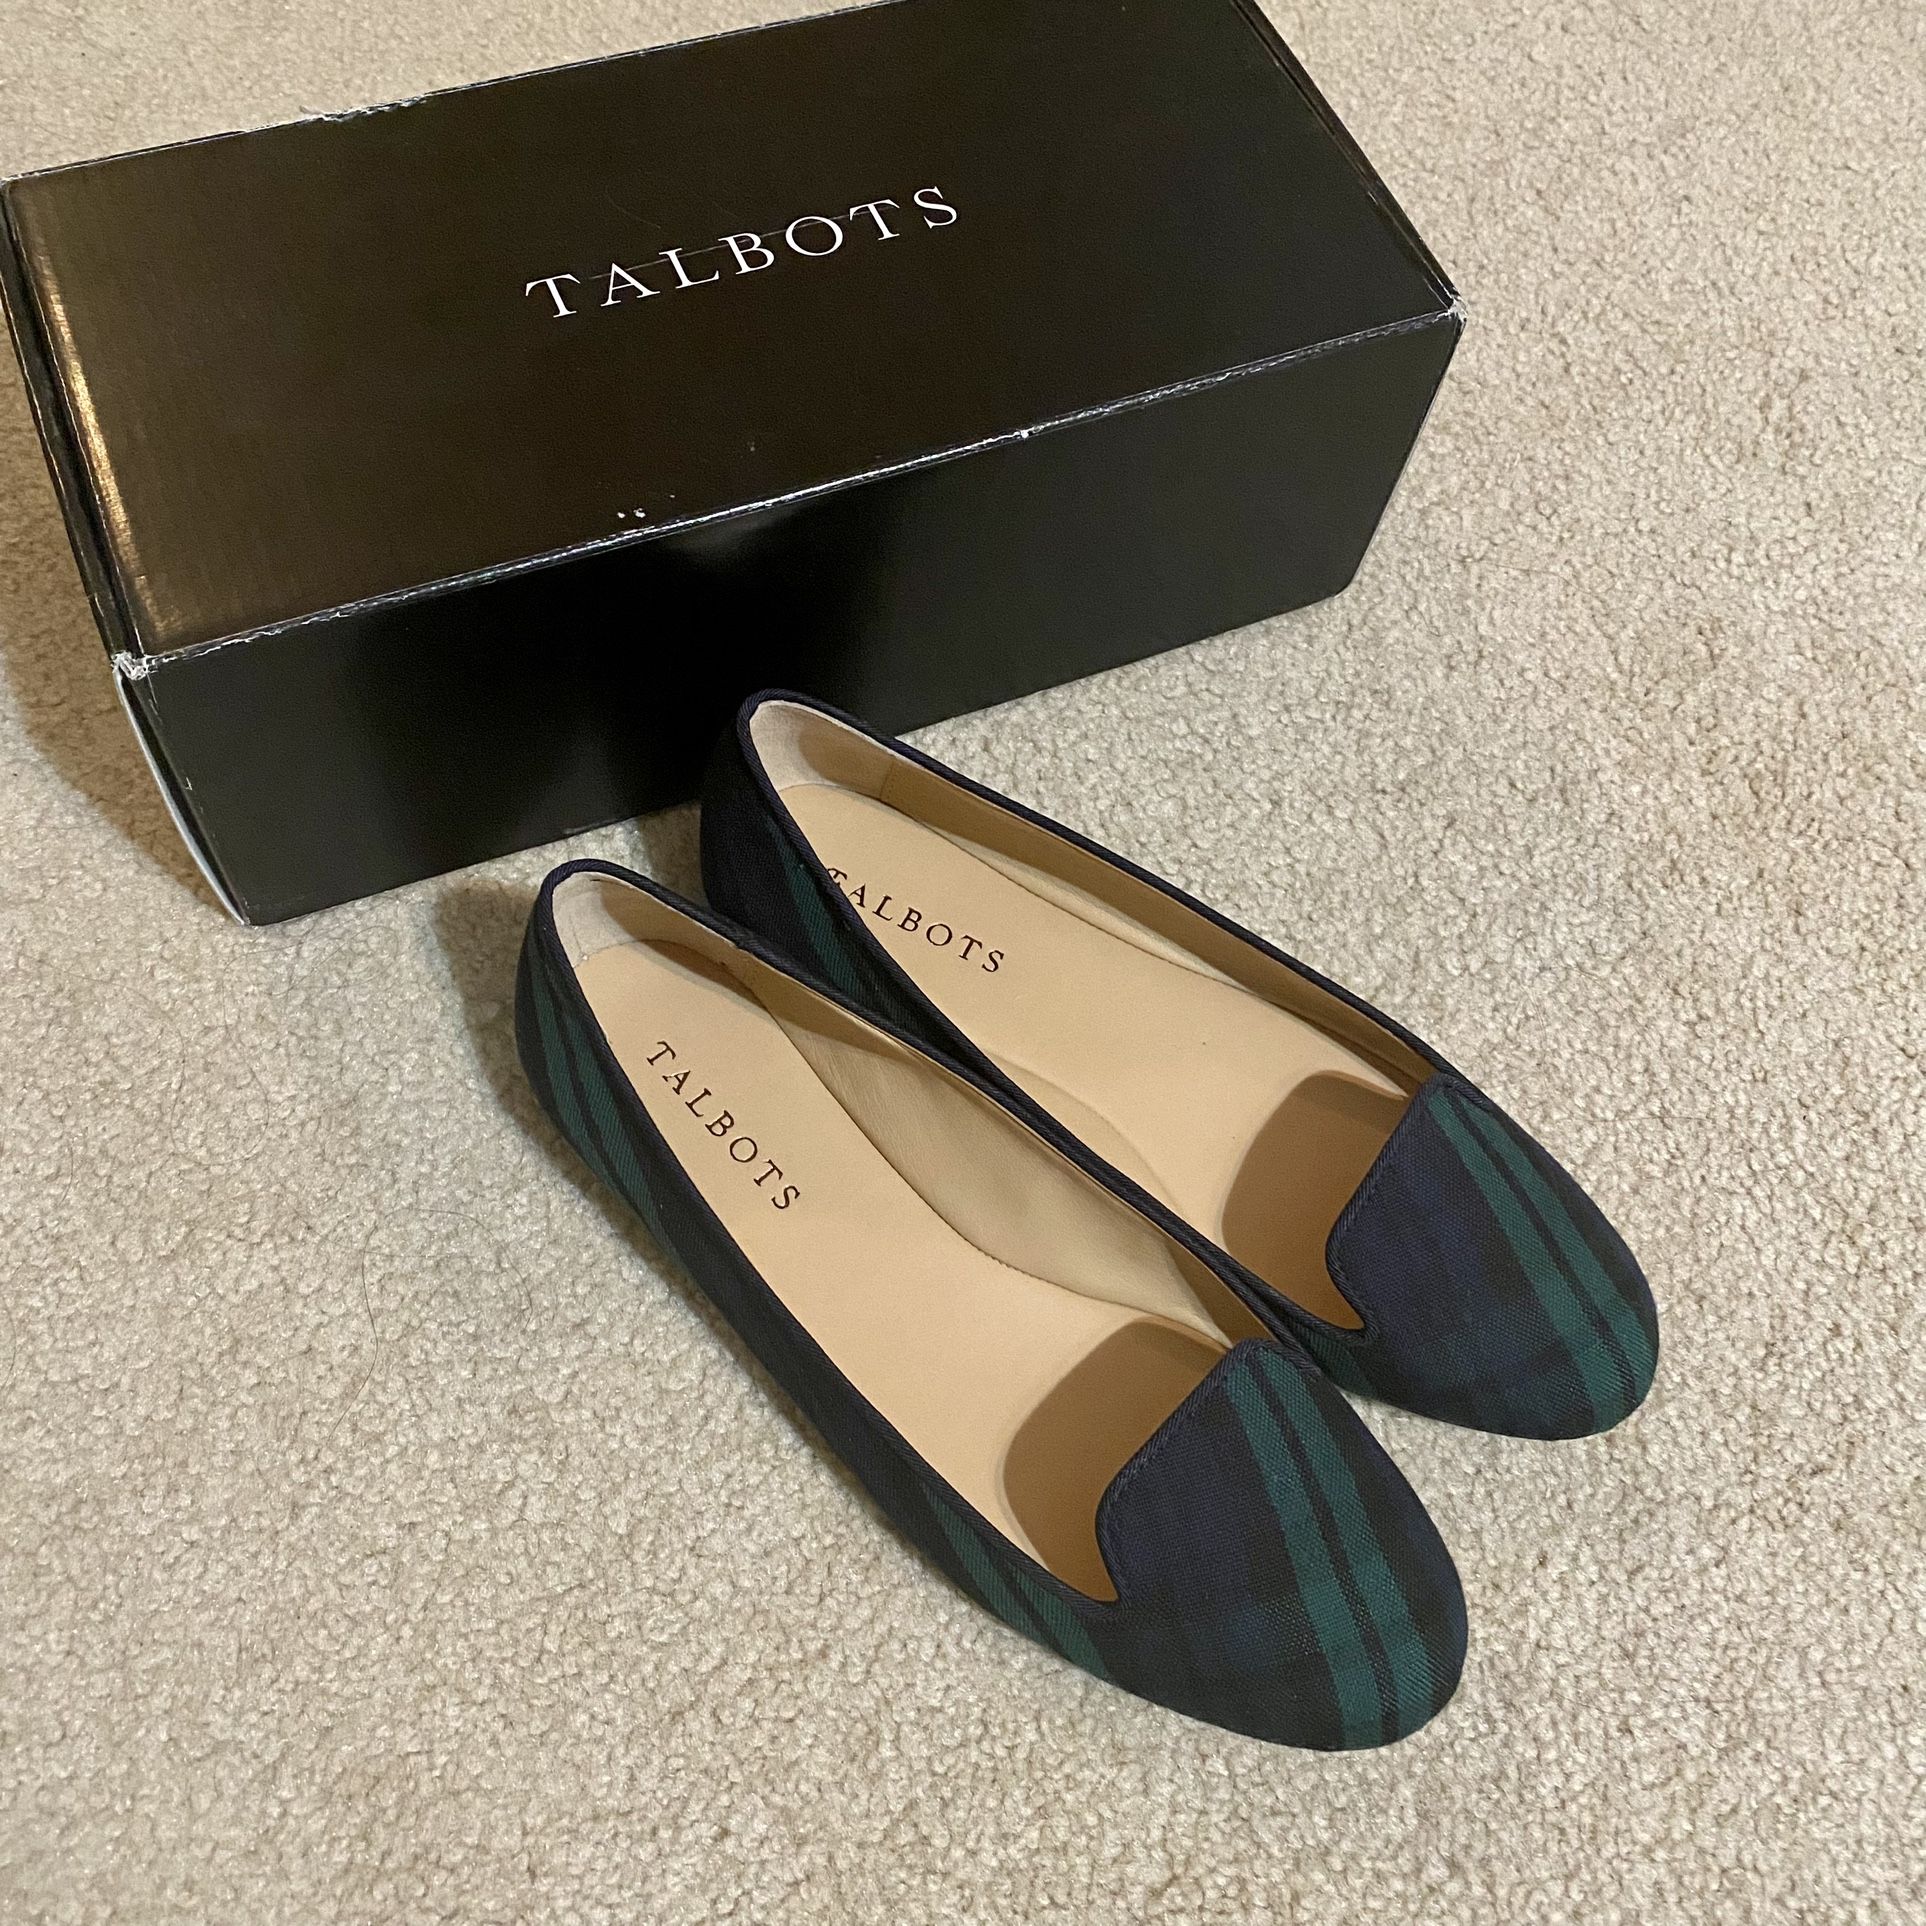 New with Box Talbots Tartan Navy and Green Plaid Slip On Loafer Shoe Flats 6.5M